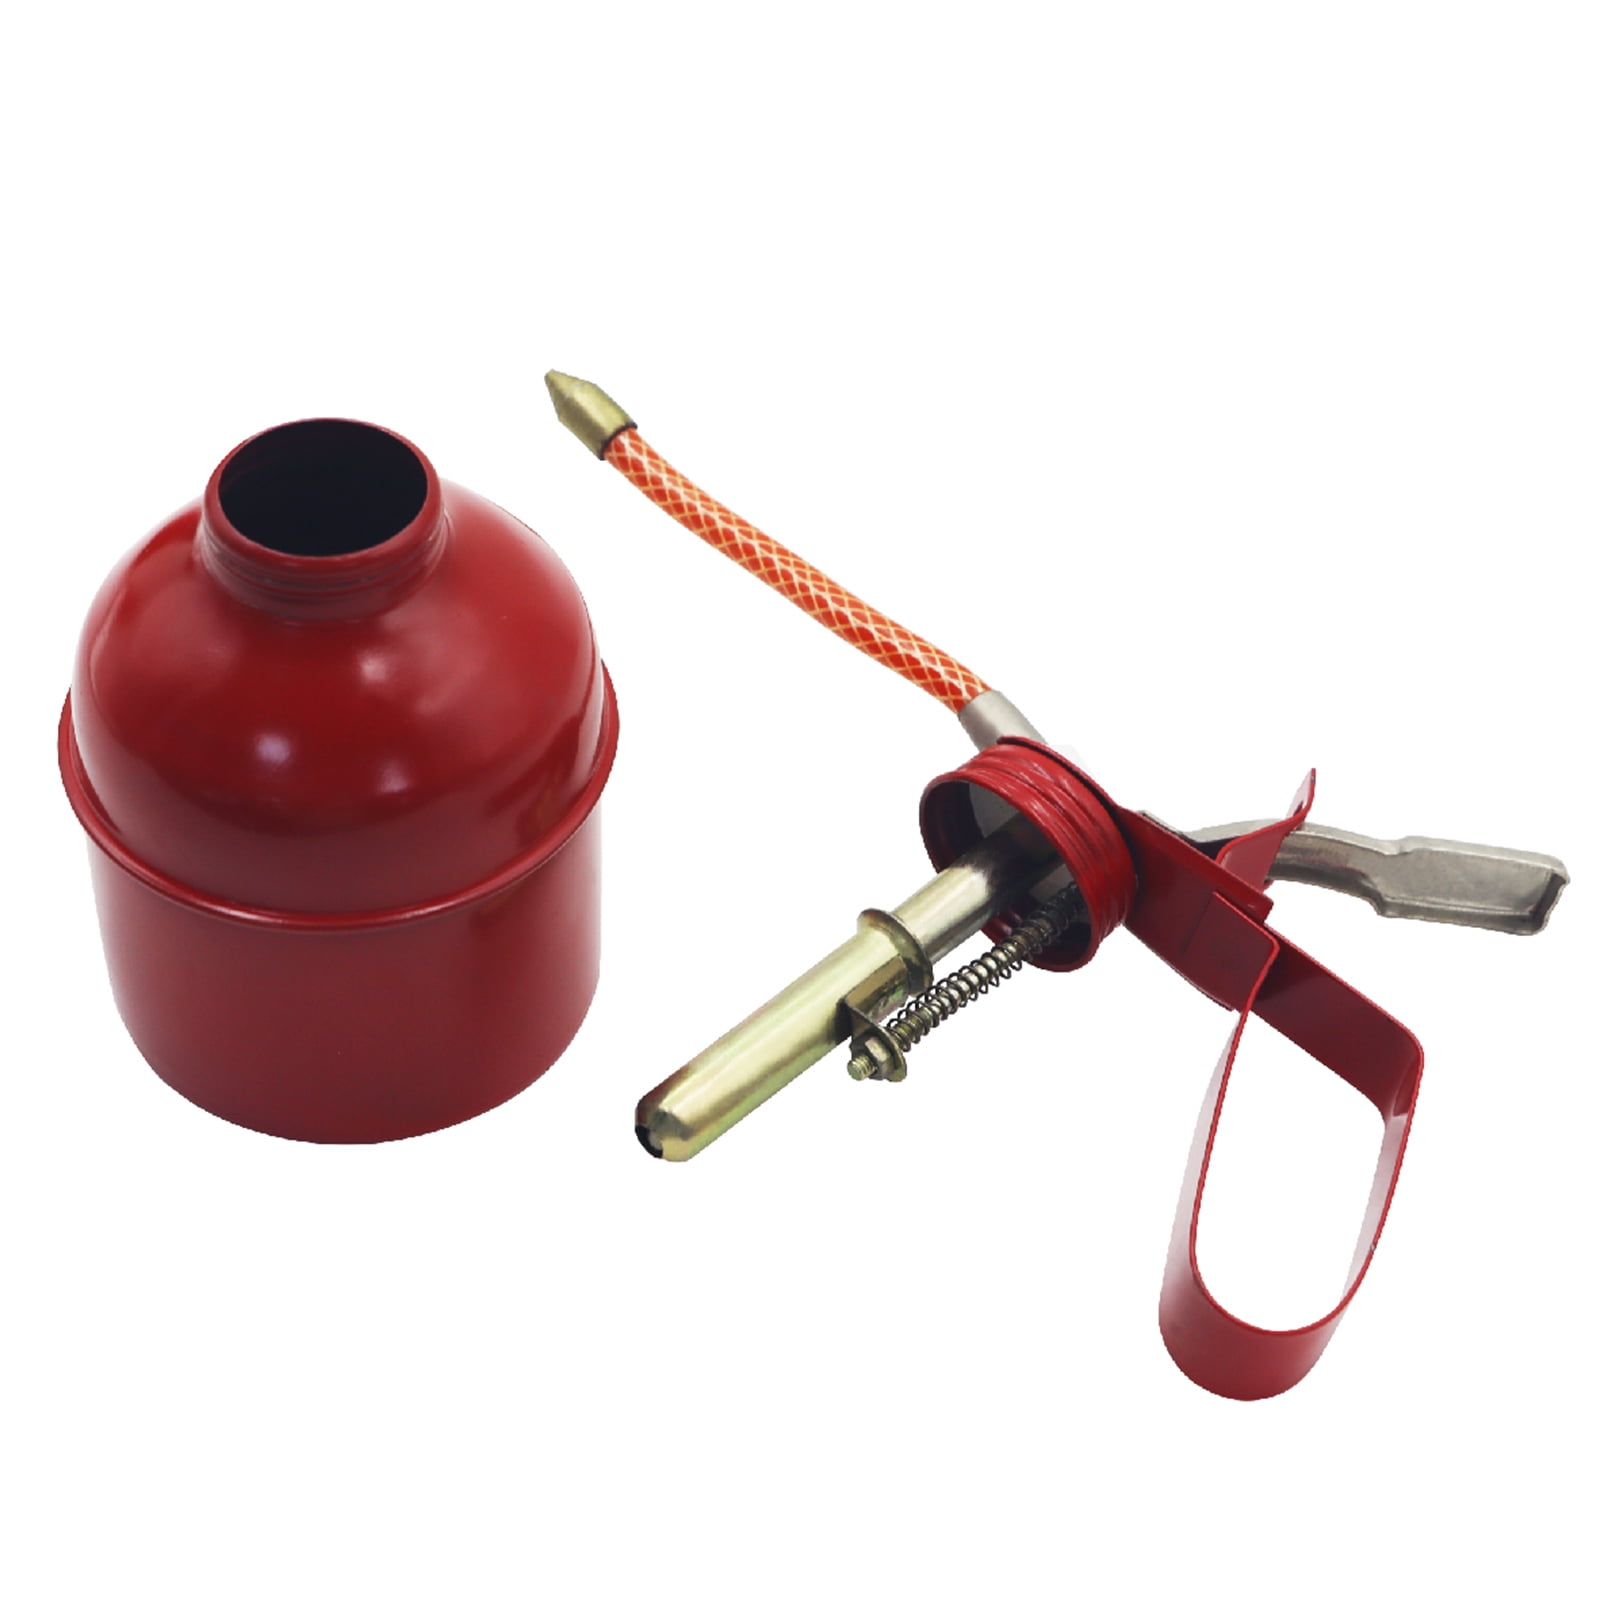 500cc hose oil can, manual oil can, small oil drip can, push-type oil can